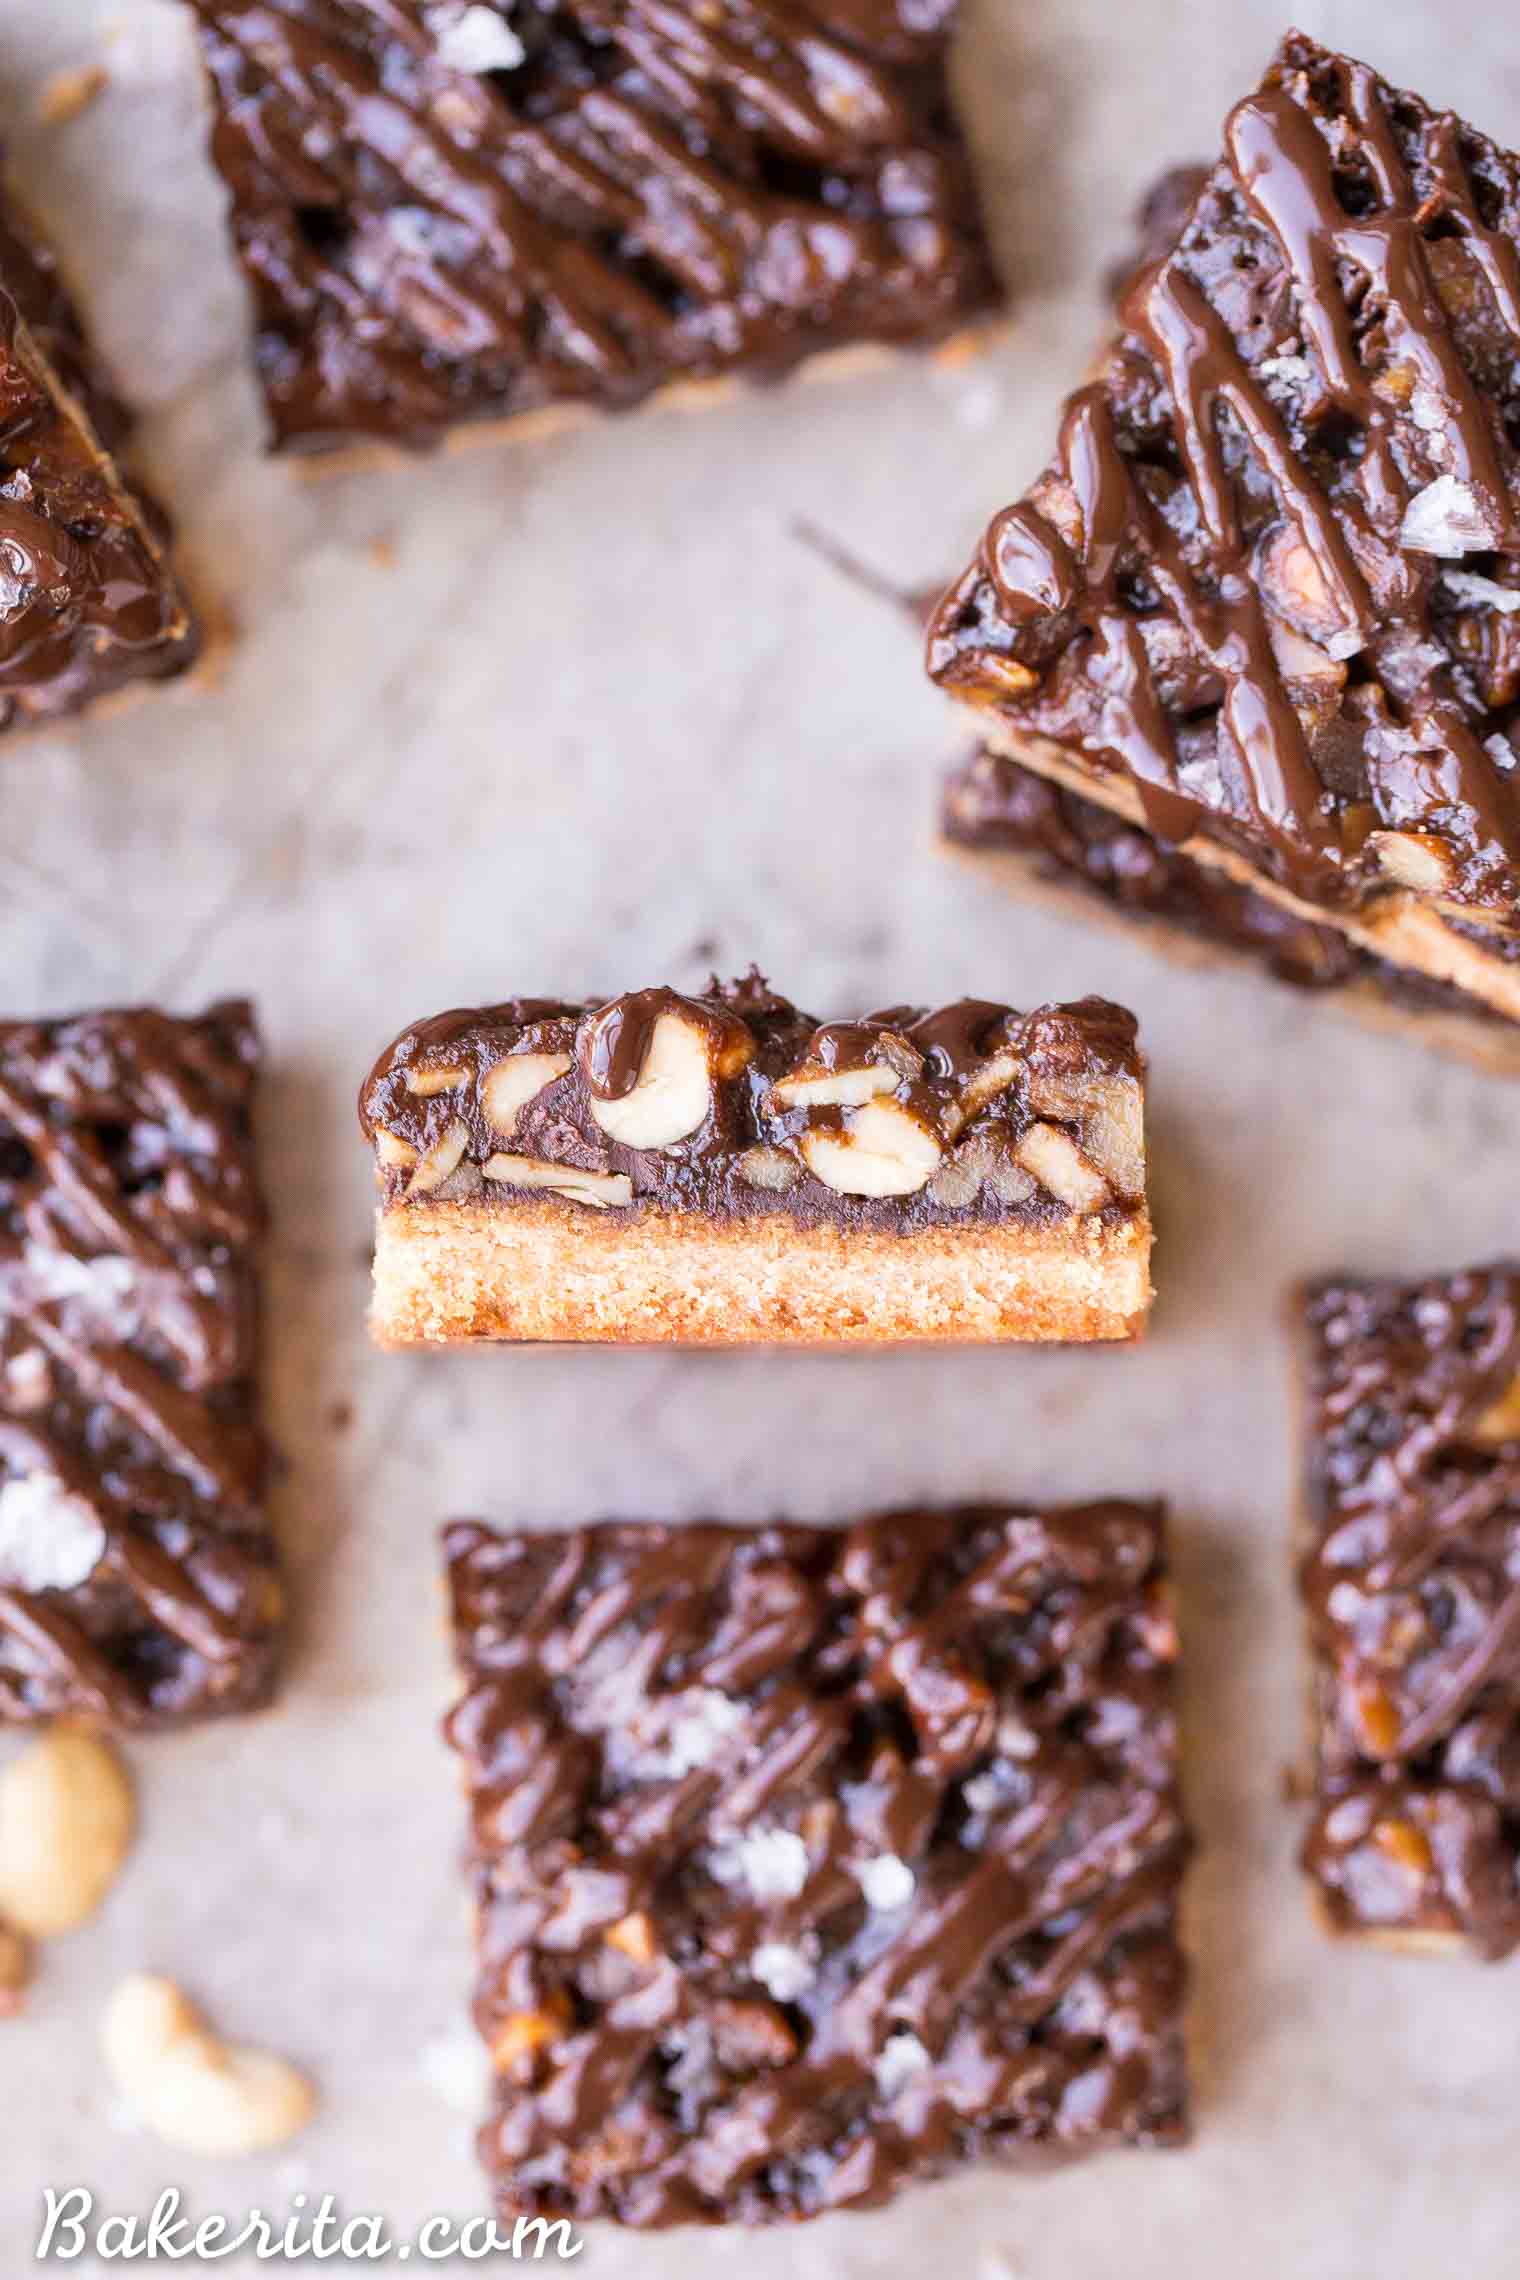 These Salted Chocolate Mixed Nut Bars are a scrumptious dessert bar that has a gooey, nutty center on top of a shortbread crust, topped with dark chocolate and flaky sea salt. These gluten free, paleo, and vegan bars are an irresistible way to satisfy your sweet tooth.